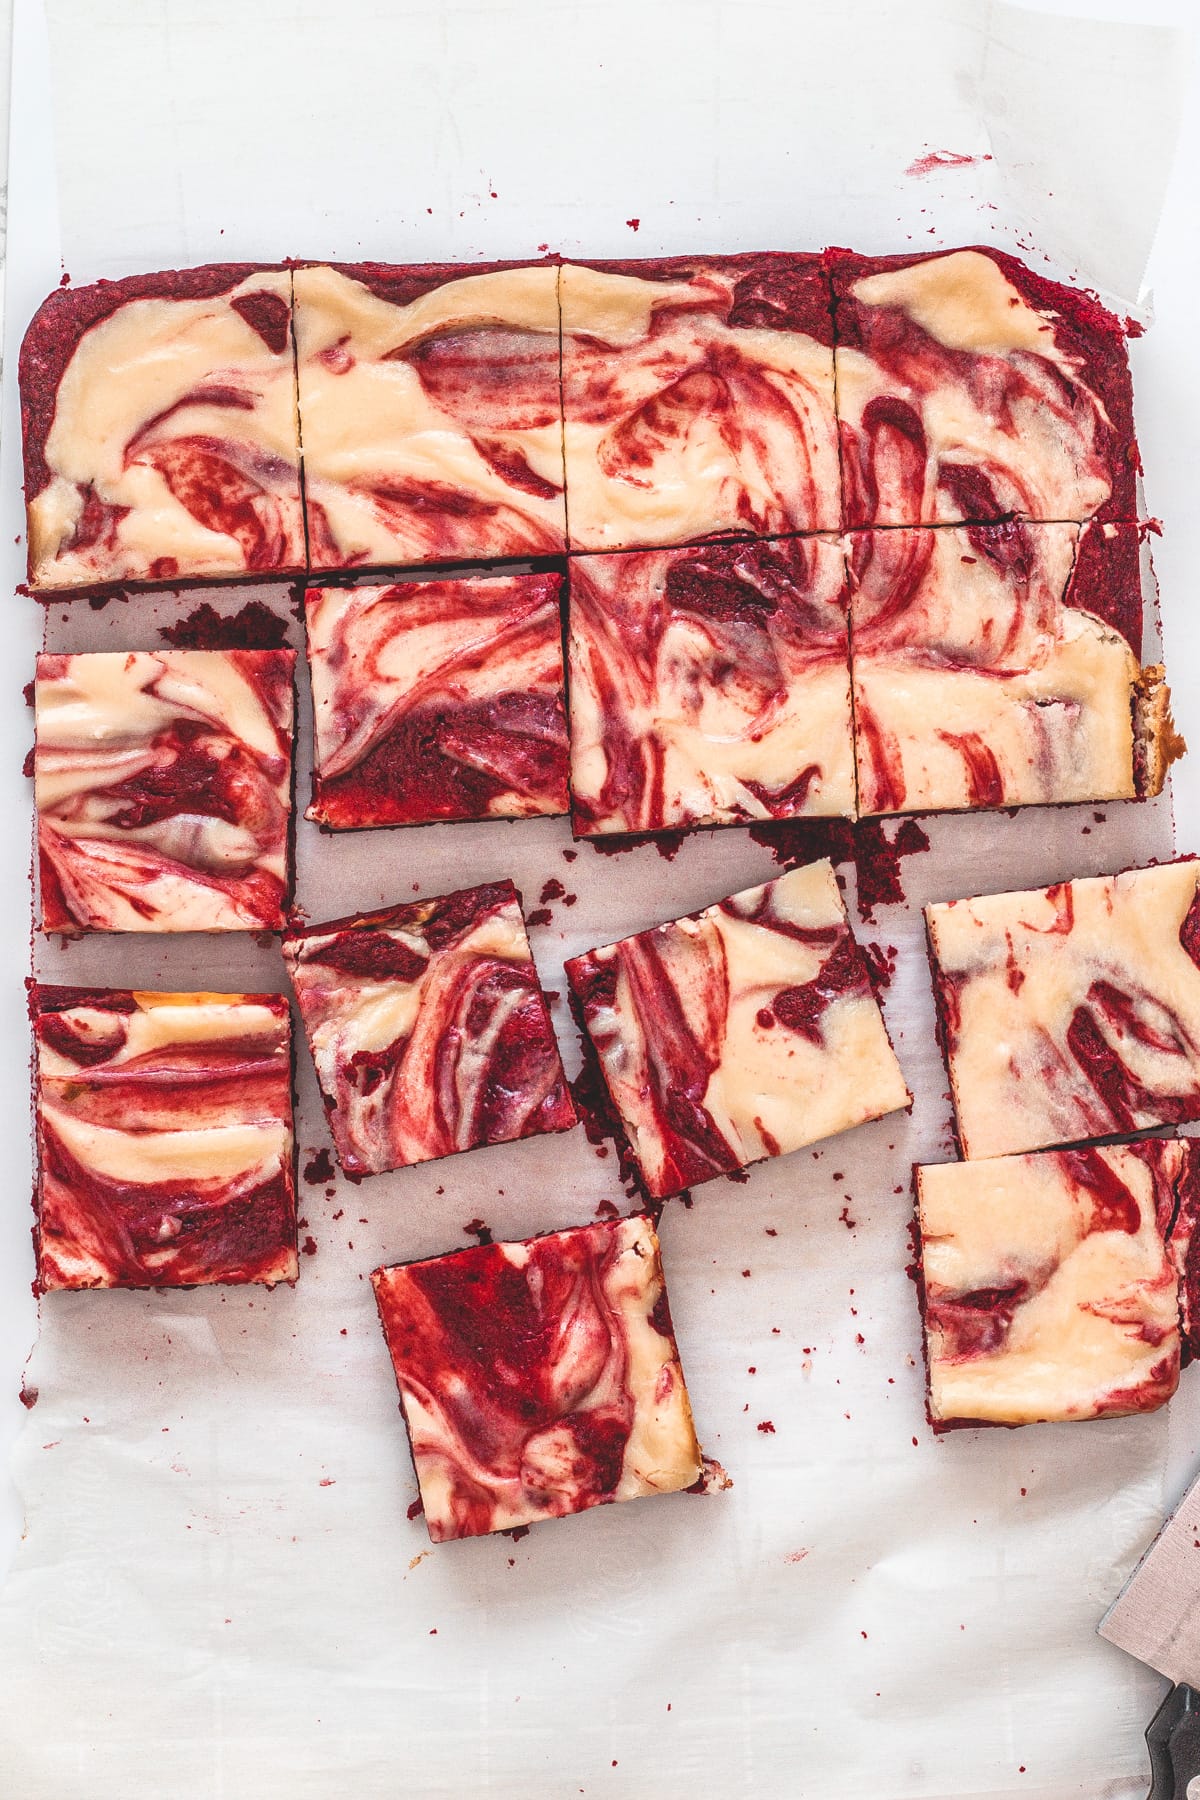 Top view of red velvet cheesecake swirl brownie pieces on a parchment paper with knife on the side.